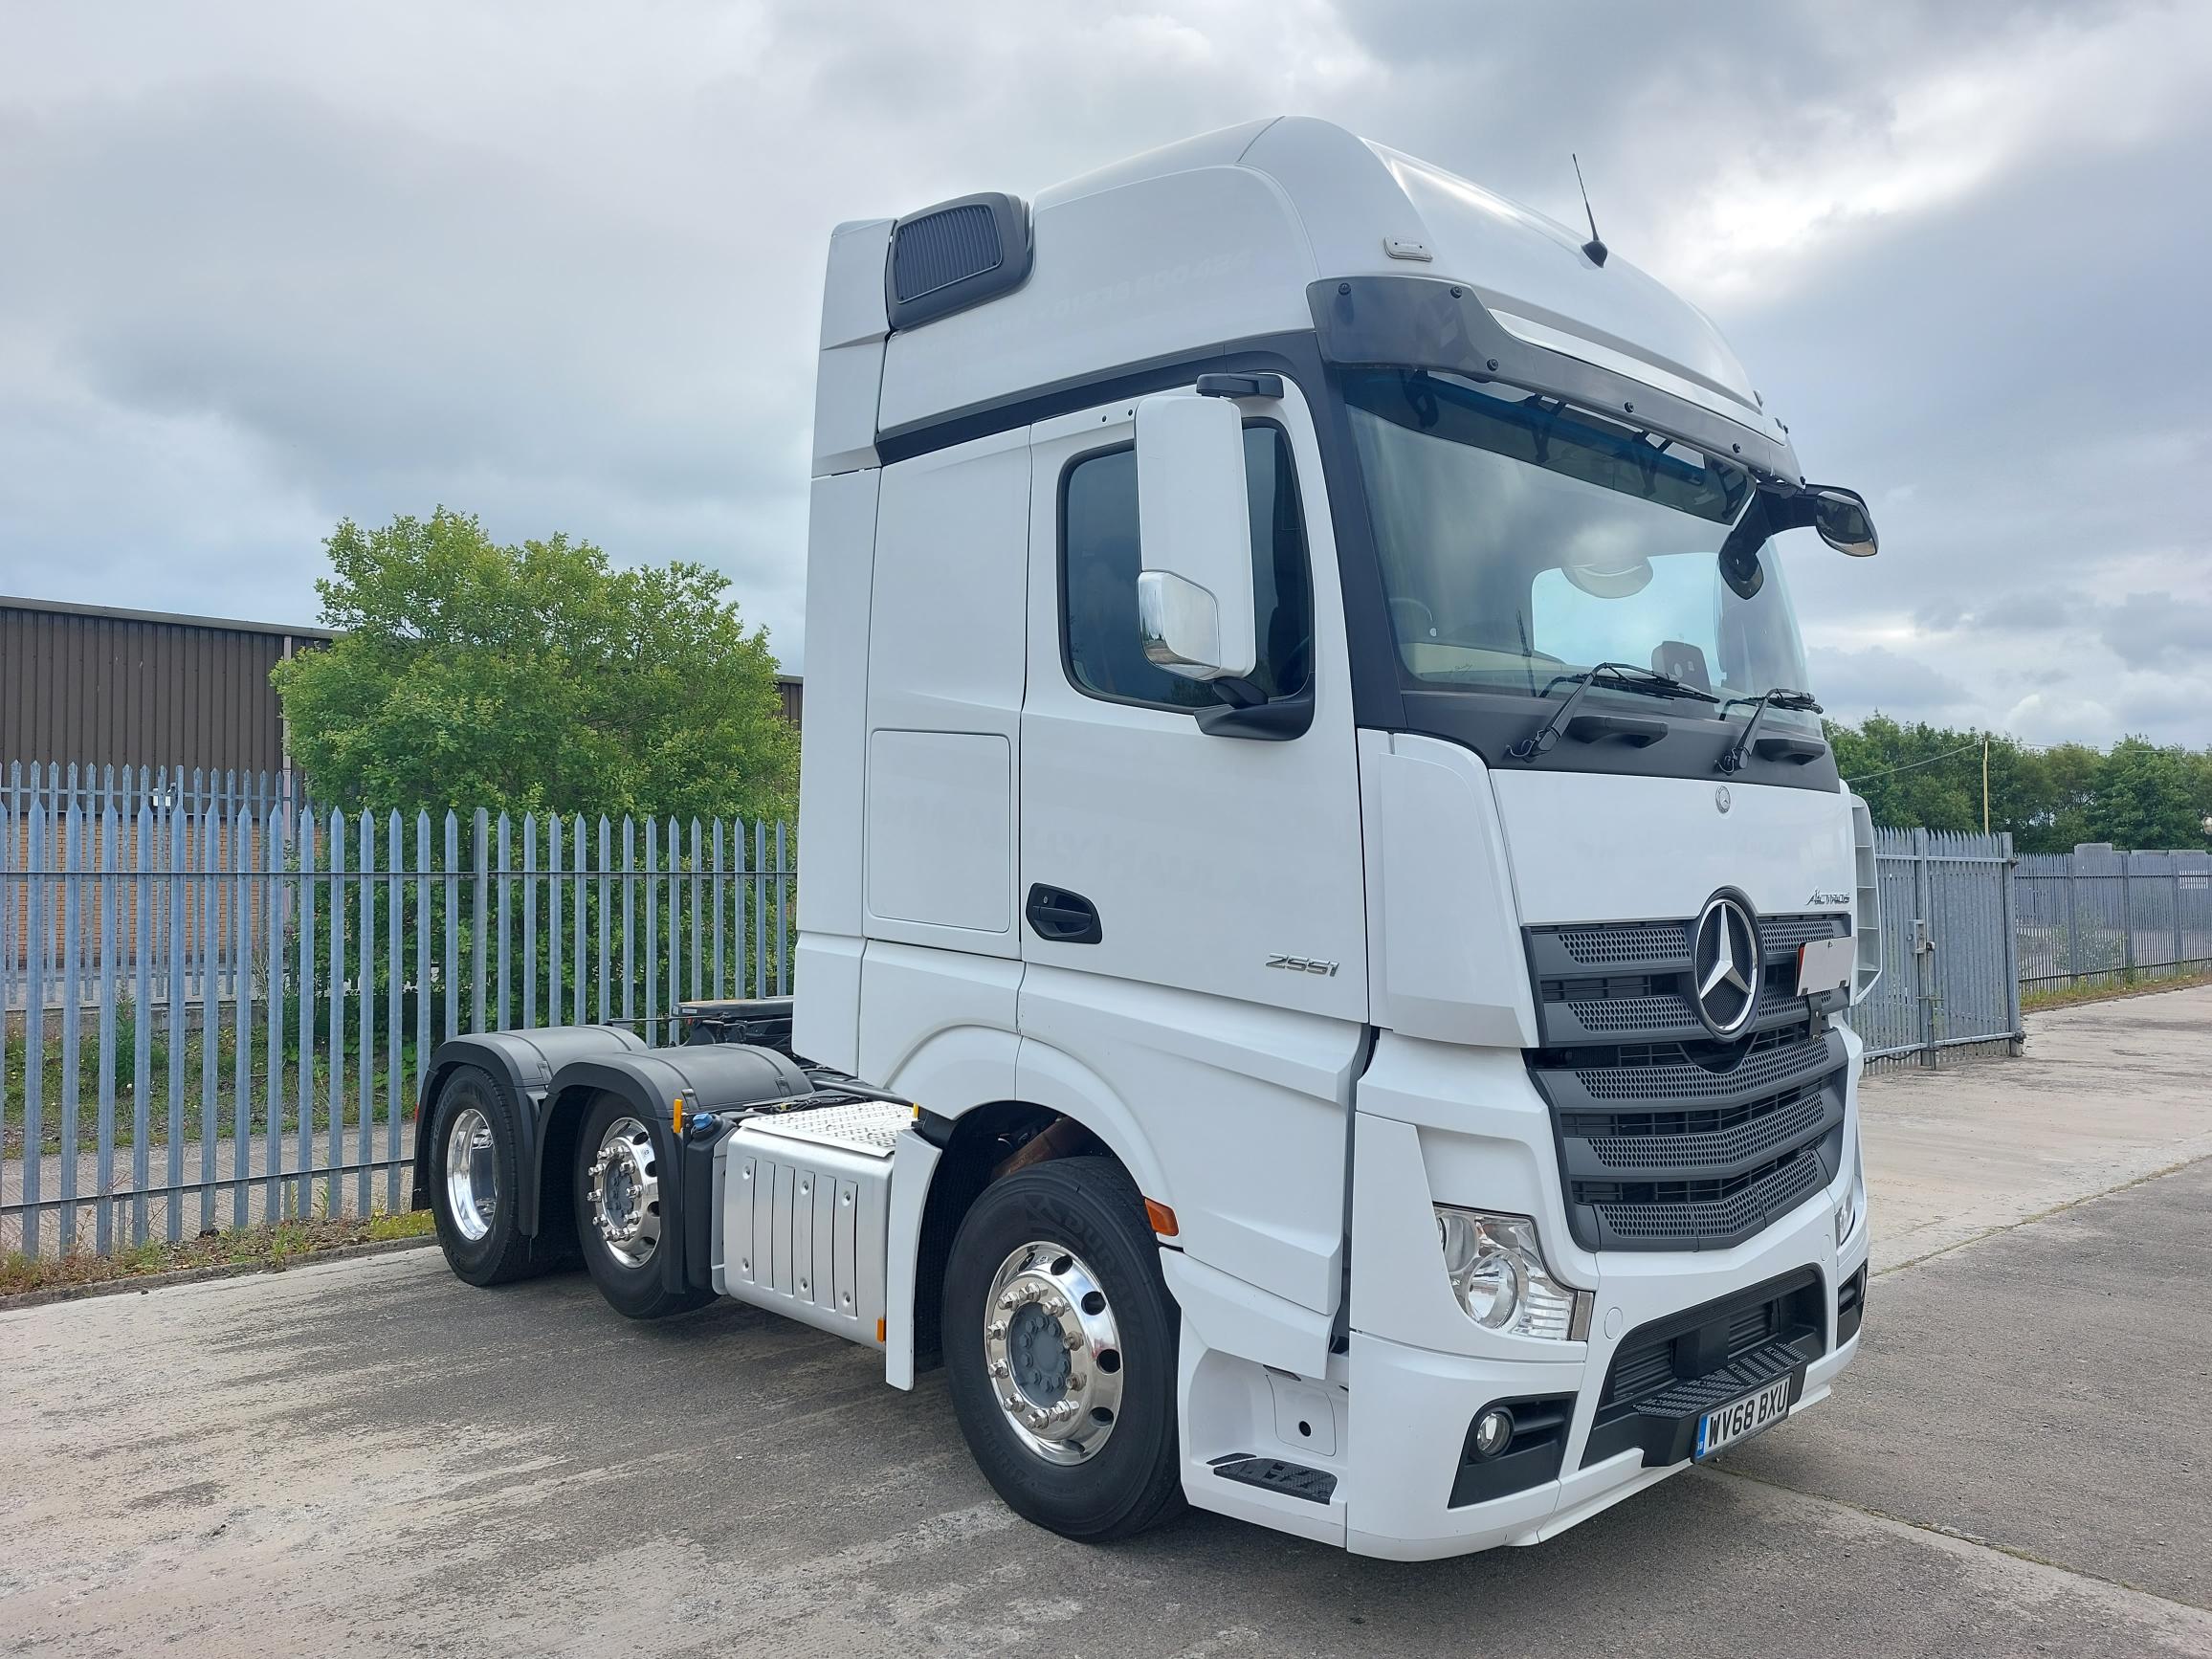 2018 (68) Mercedes Actros, Euro 6, 510bhp, Gigaspace Single Sleeper Cab, 4m Wheelbase, Automatic Gearbox, Air Con, Cruise Control, Steering Wheel Controls, Electric Mirrors & Windows, Fridge, Microwave, Warranty & Finance Options Available.